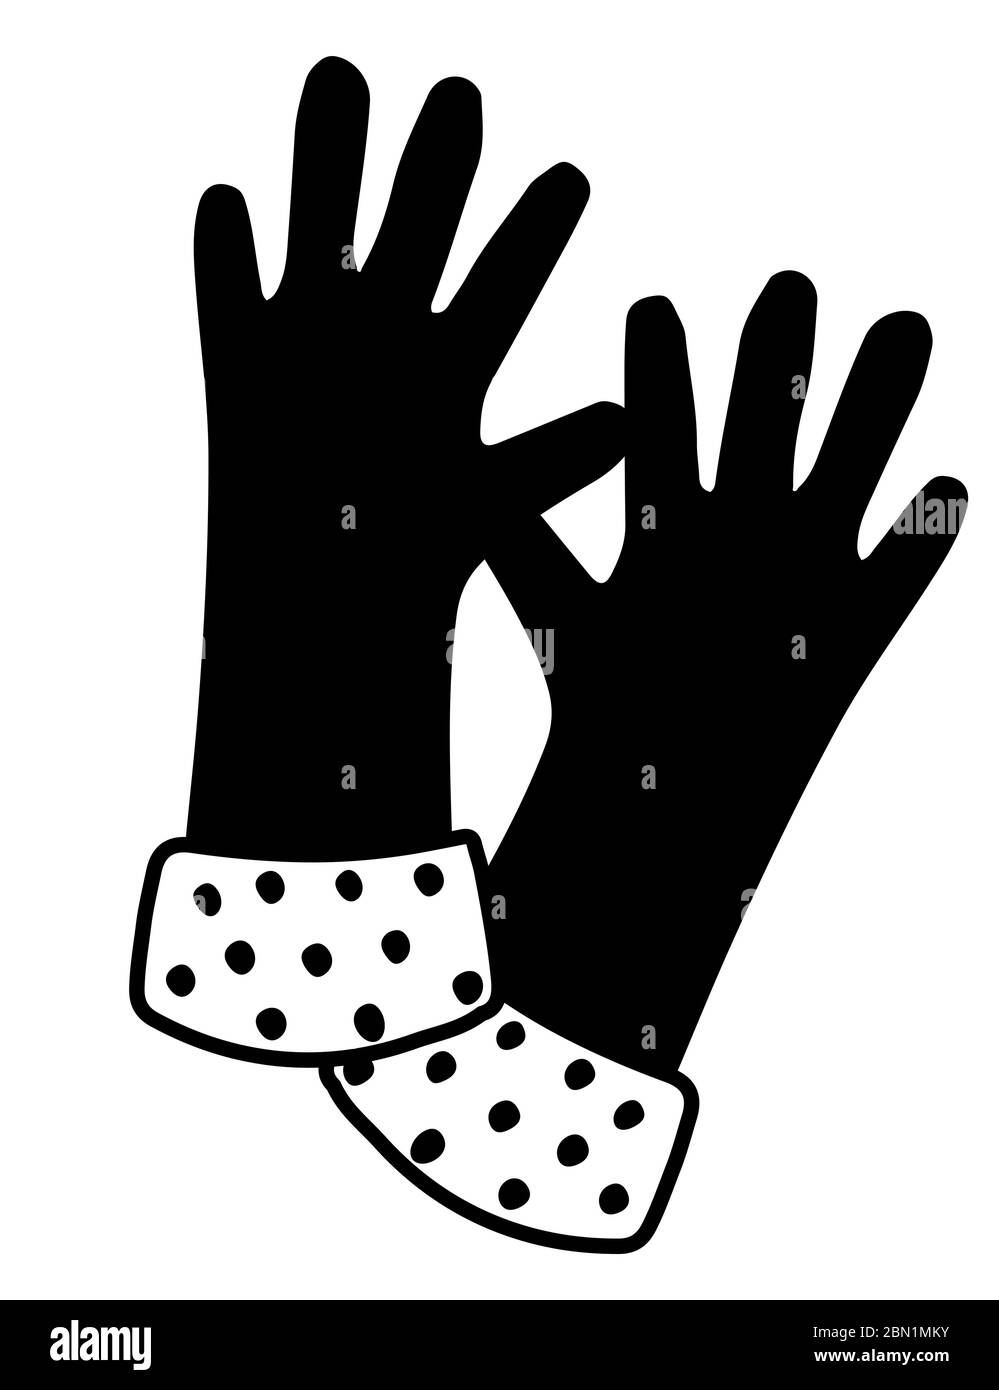 Pair of black silhouette gardening hand gloves protection equipment flat vector illustration isolated on white background Stock Vector